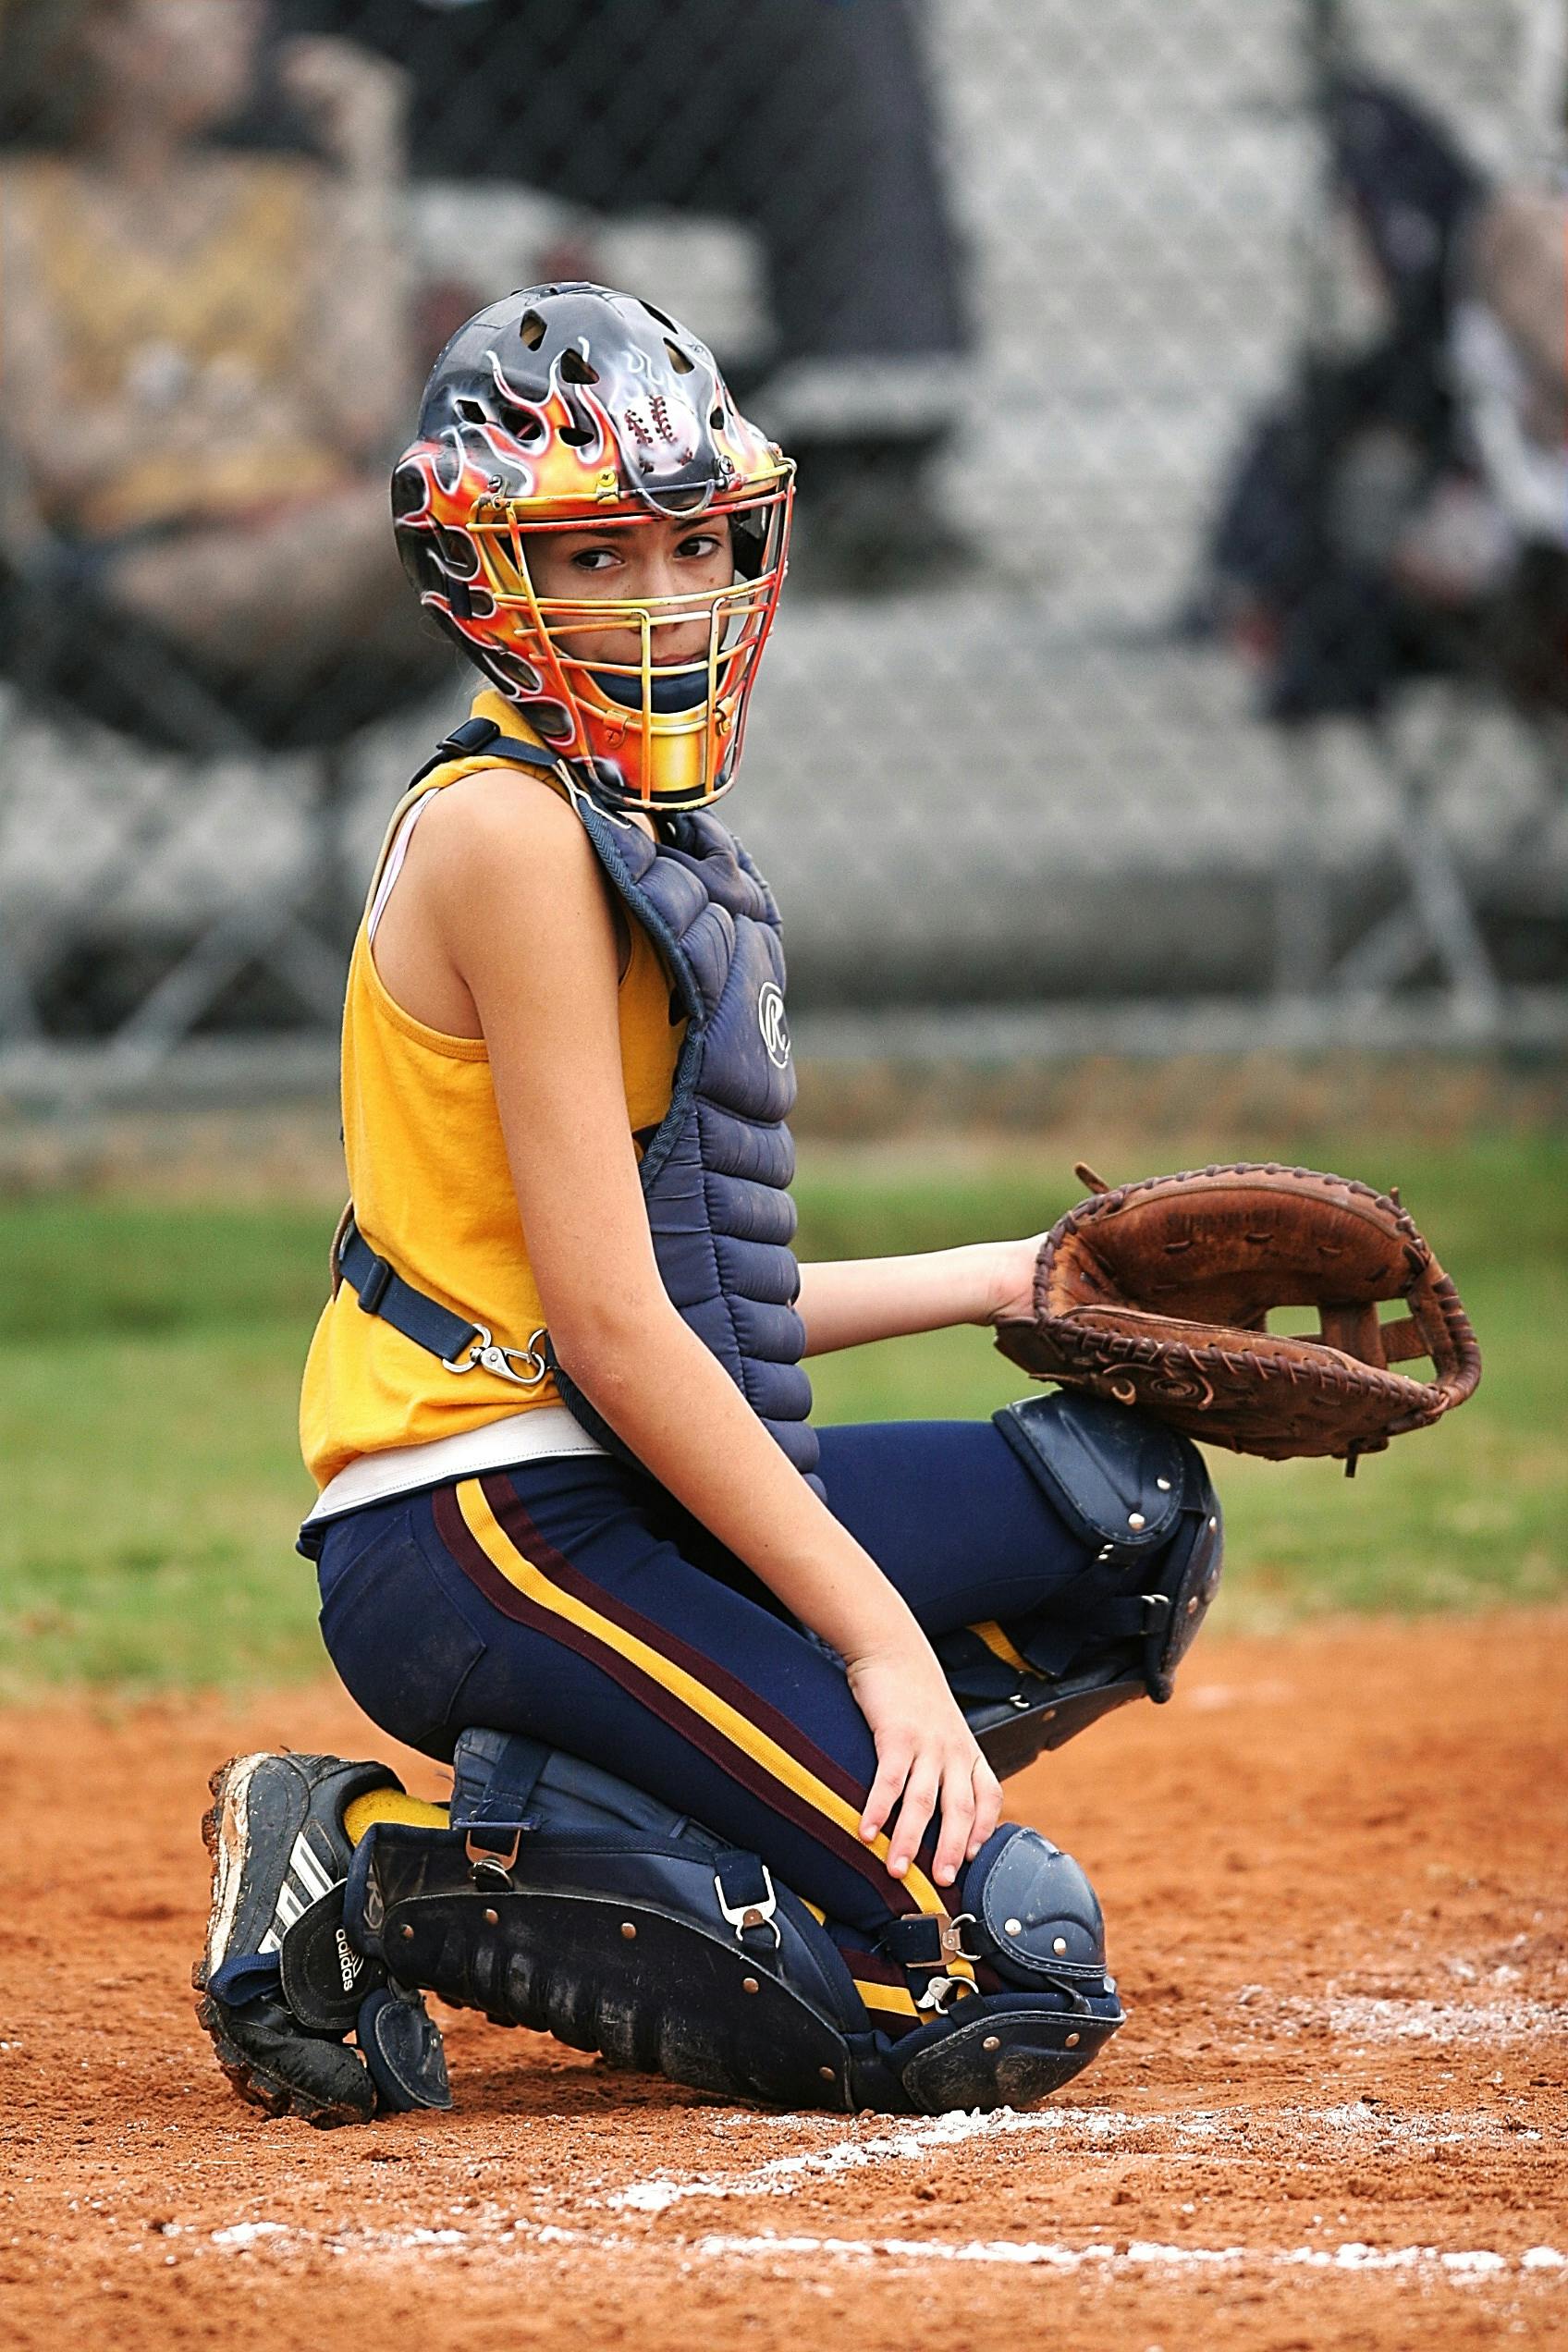 female baseball catcher portrait photo during the game at daytime